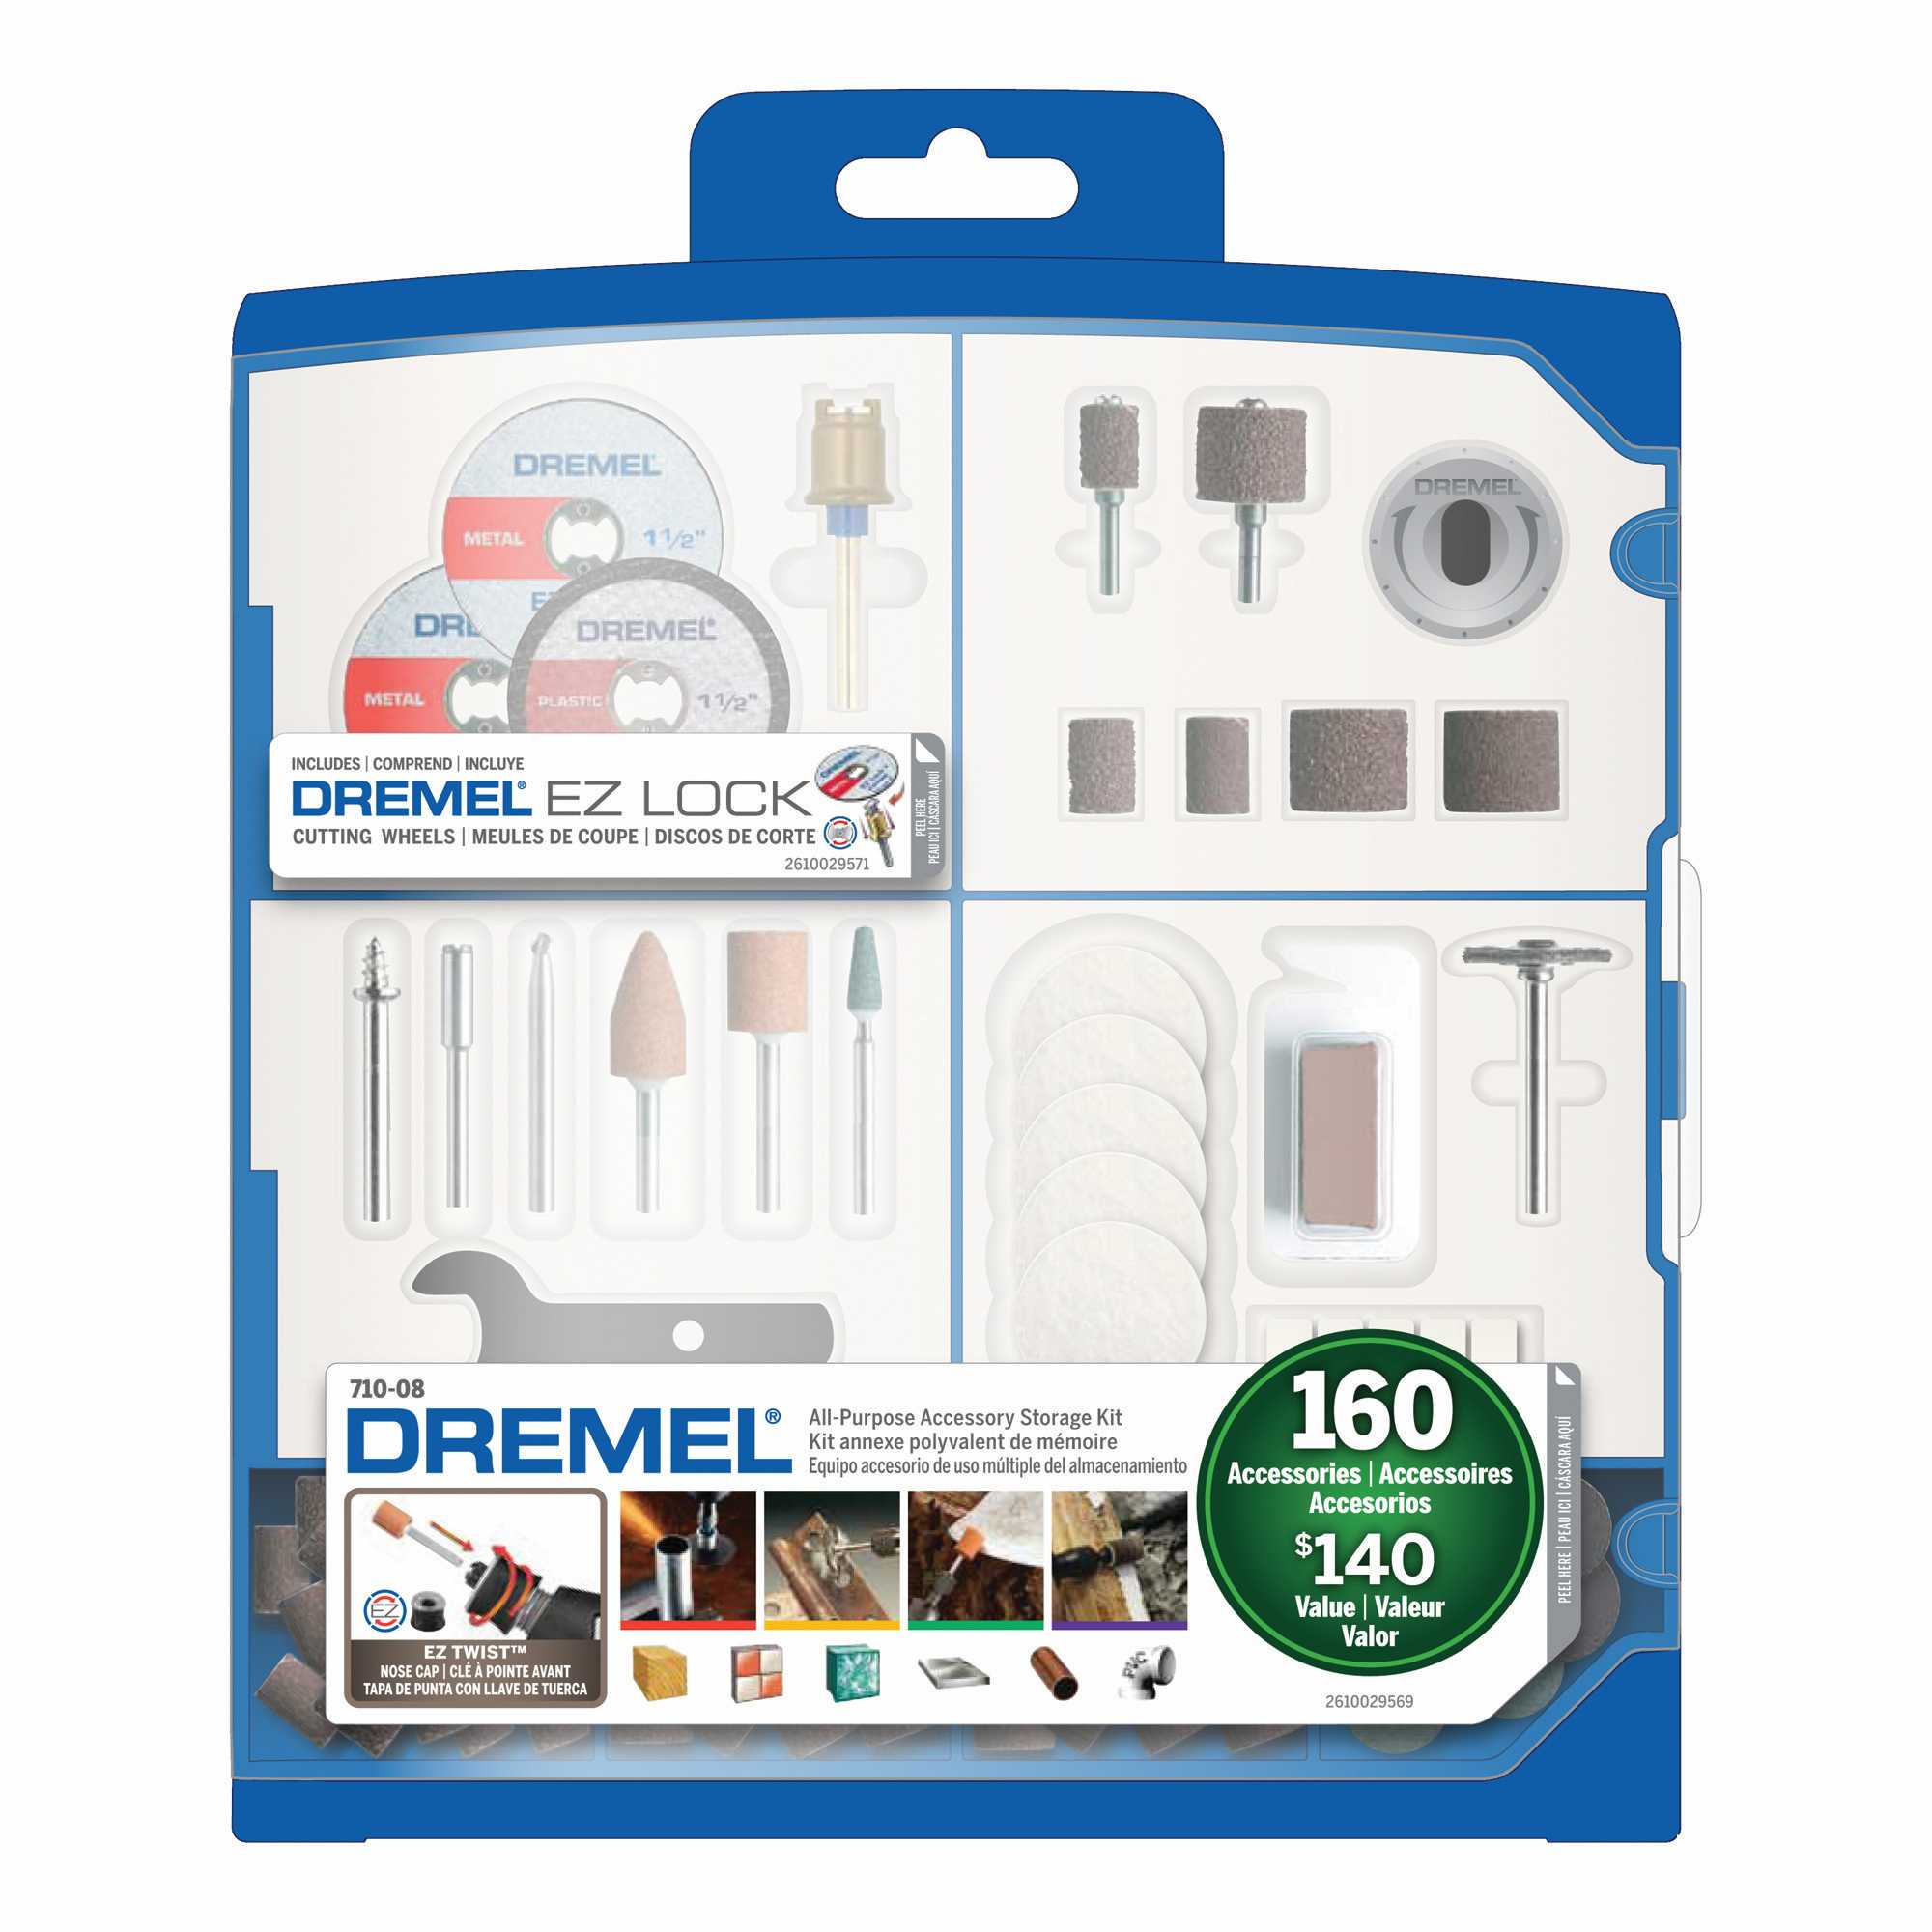 Dremel 710-08 Rotary Tool Accessory Kit with Plastic Storage Case 160-Piece